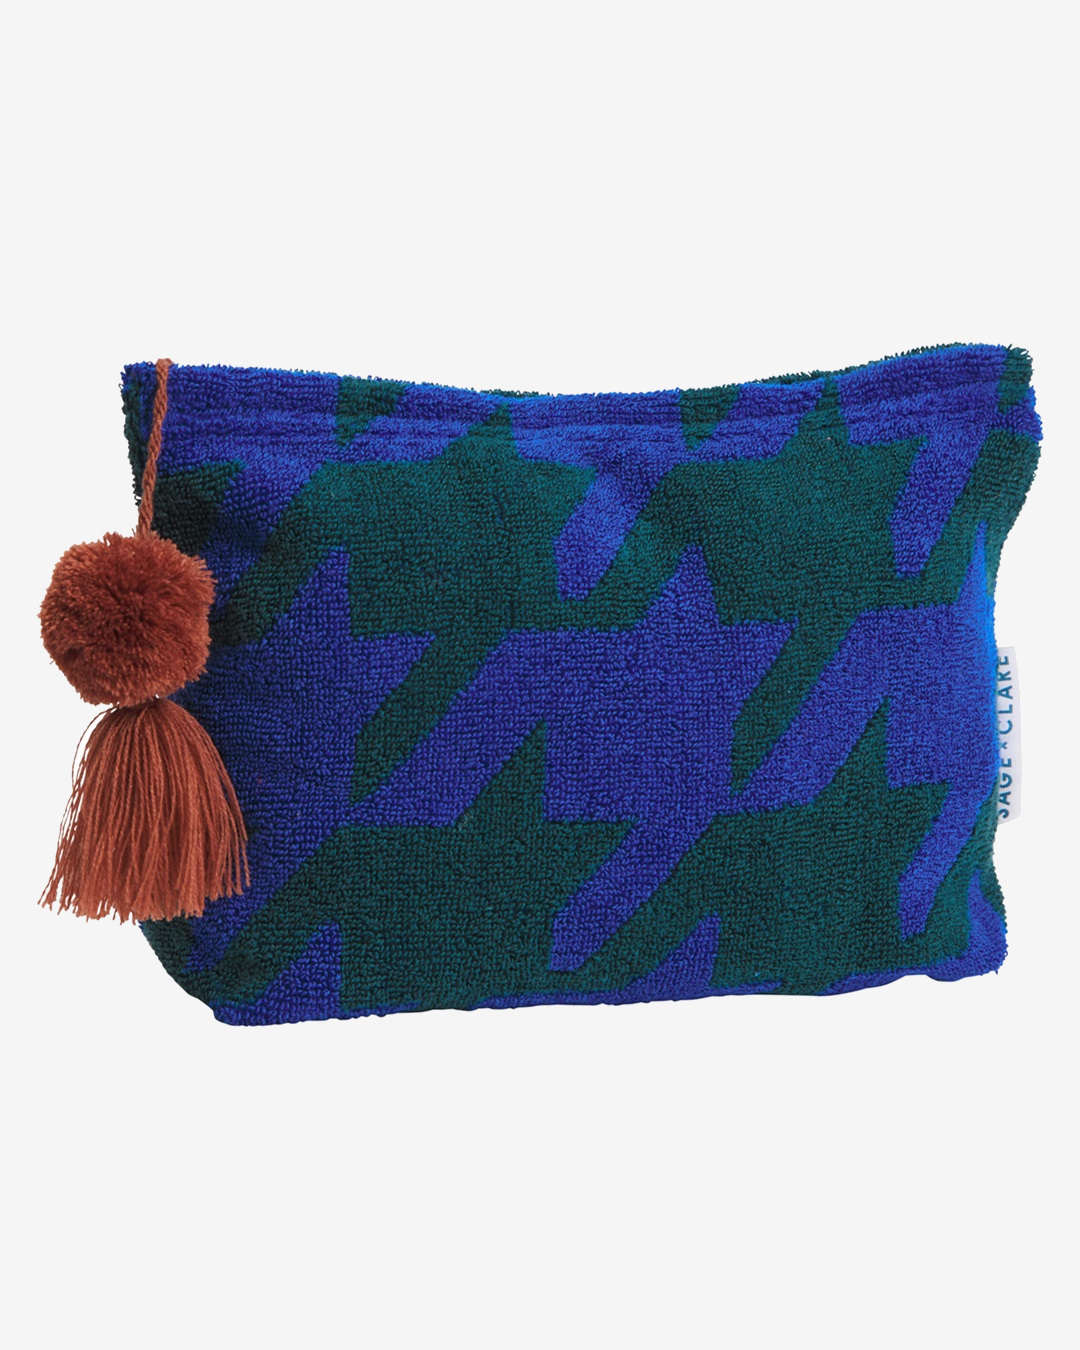 Blue and green pouch with brown pom pom